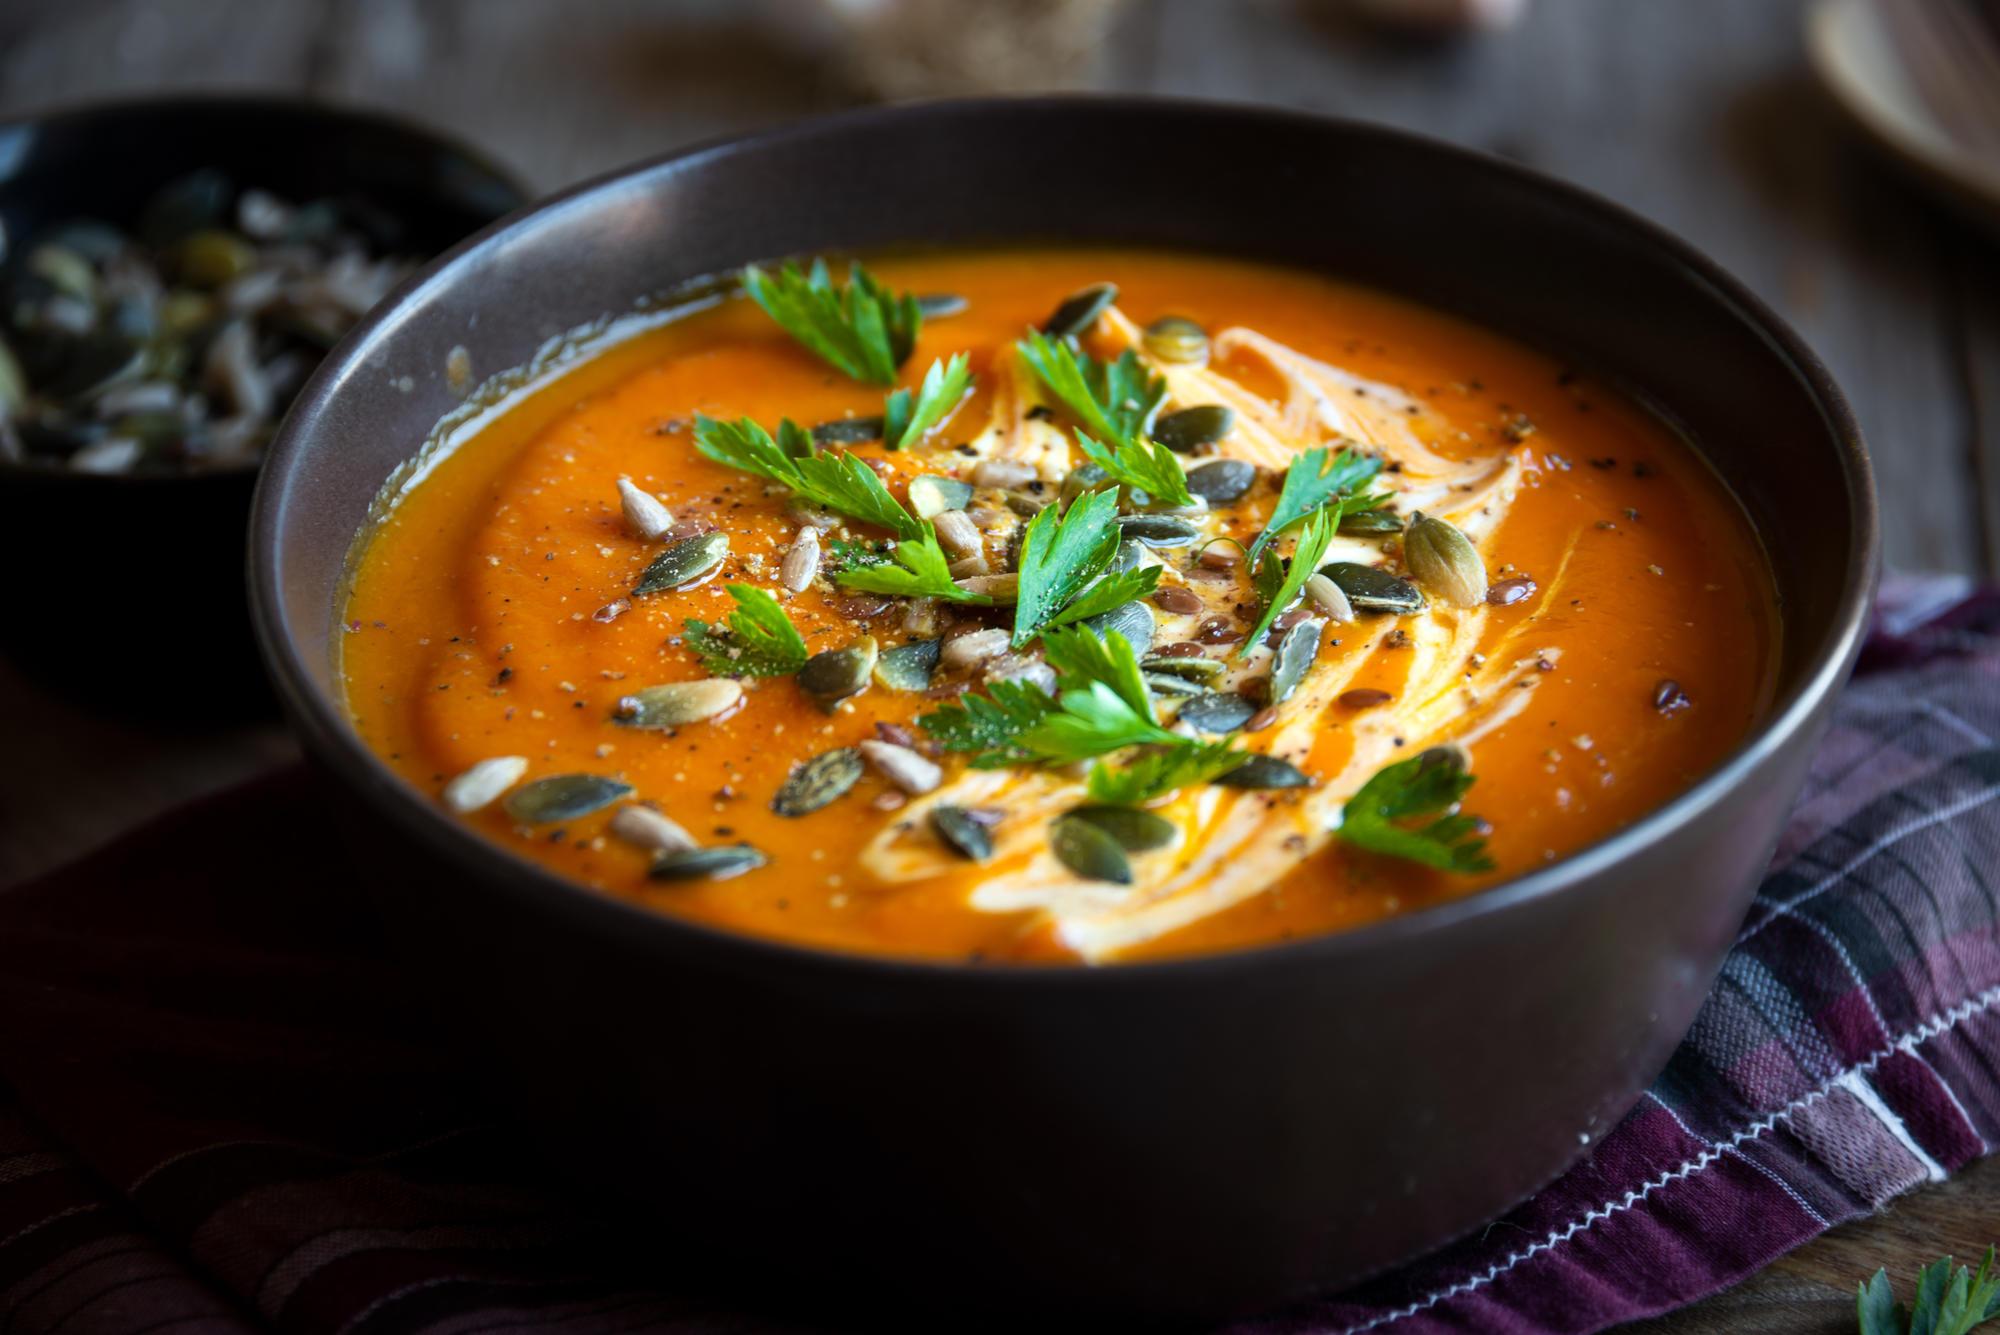 A bowl of pumpkin soup topped with pumpkin seeds, sour cream, and herbs.